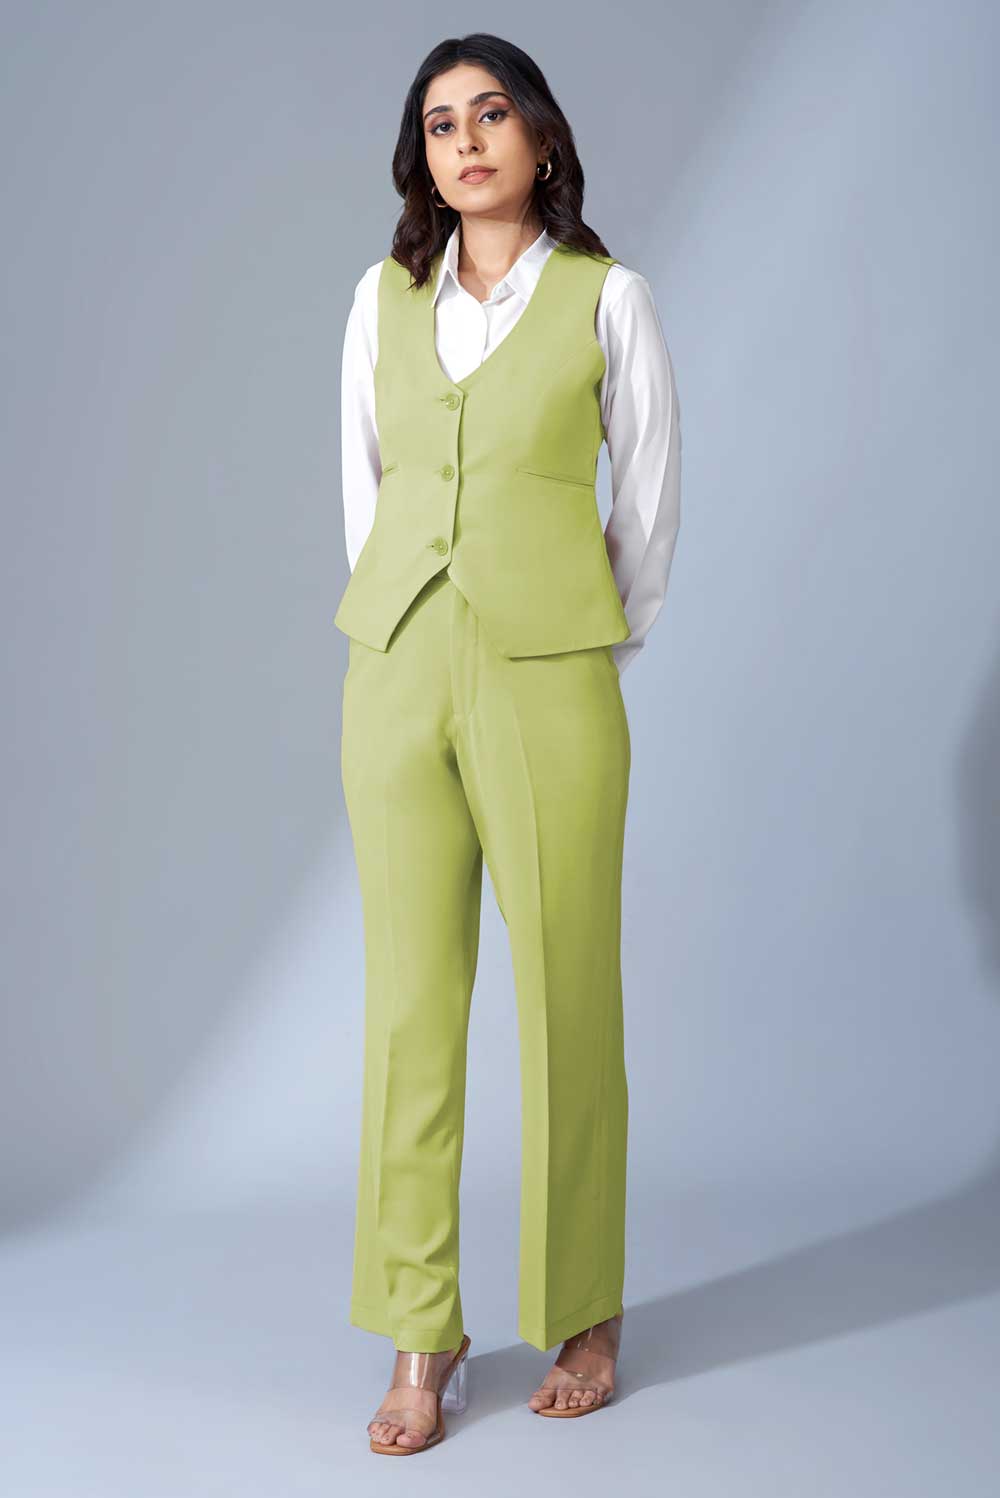 Empower Your Professional Image: Women's Blazers and Suits at JAey.in